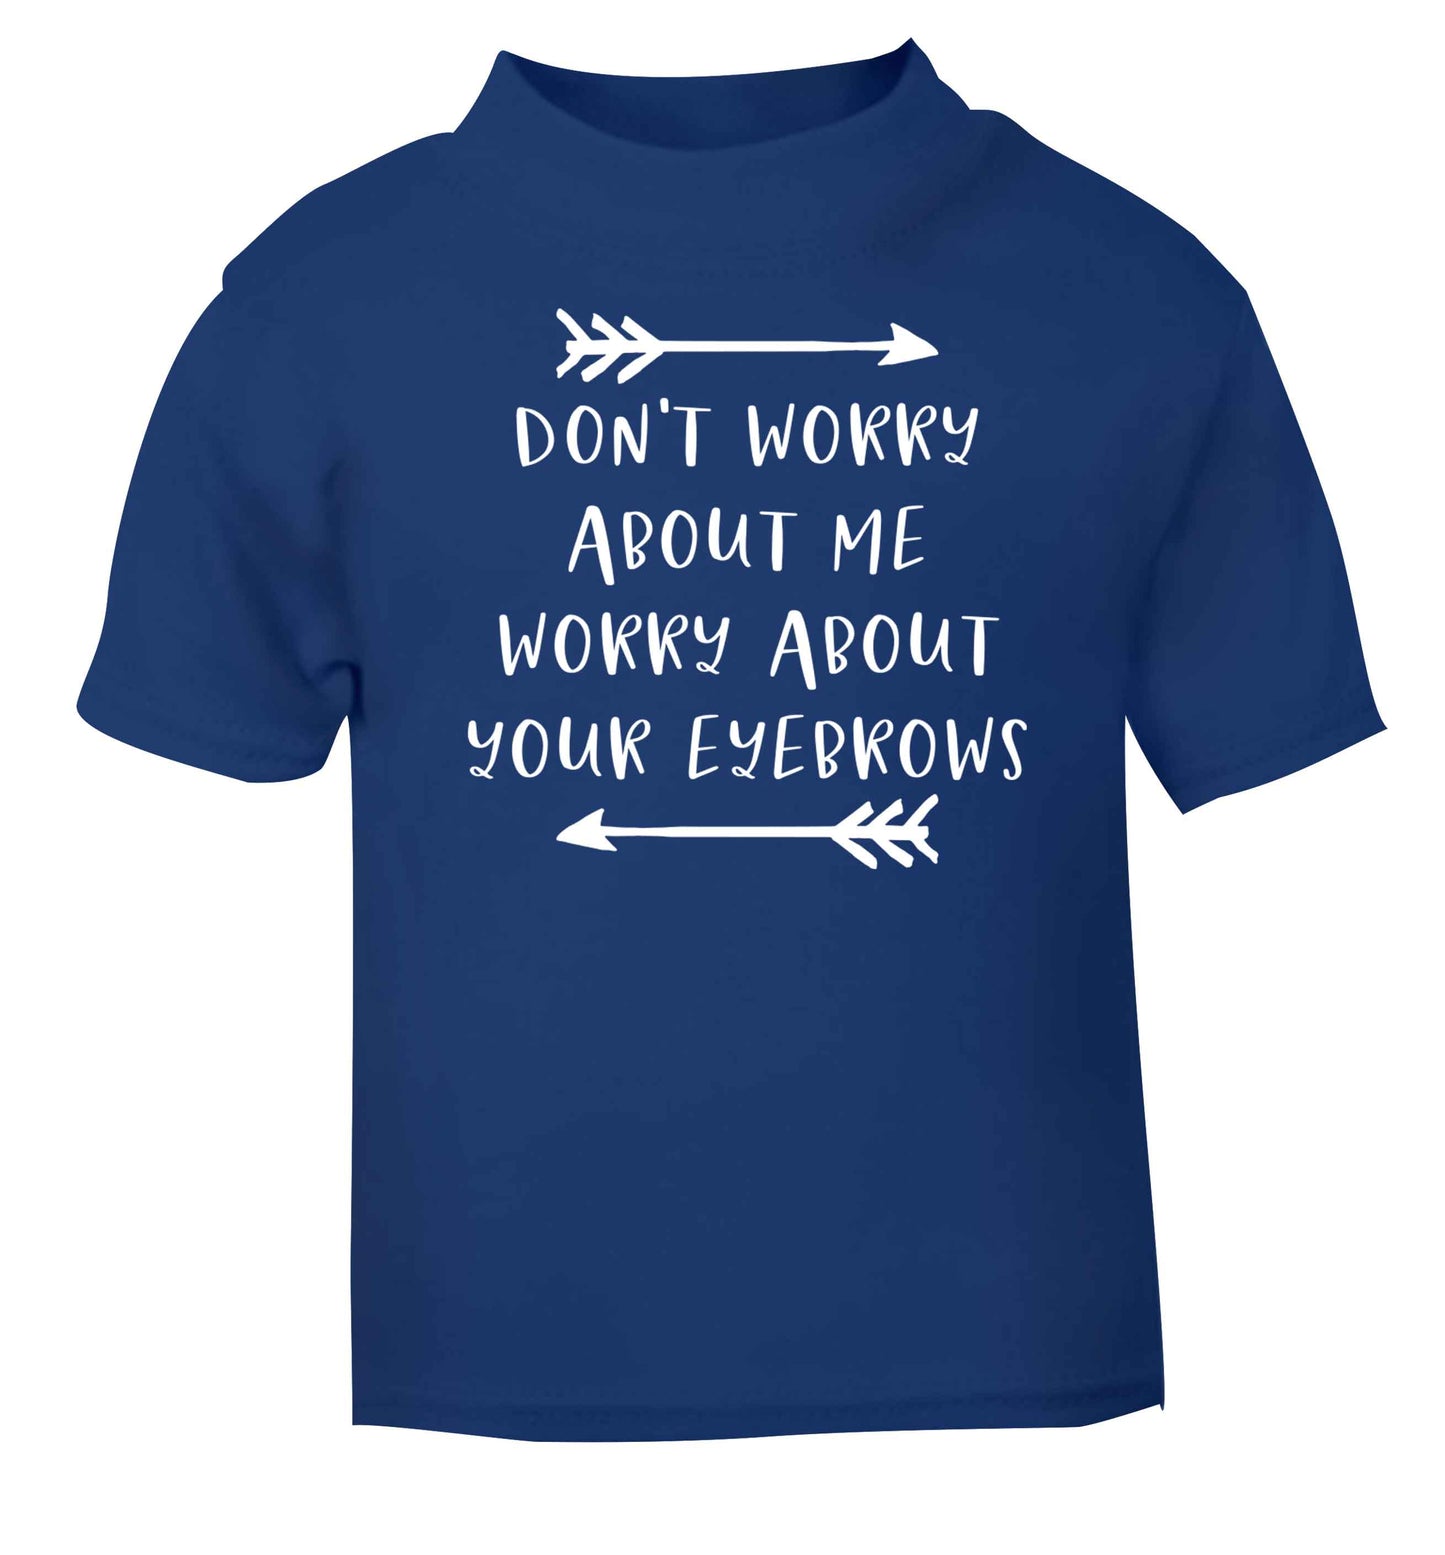 Don't worry about me worry about your eyebrows blue baby toddler Tshirt 2 Years